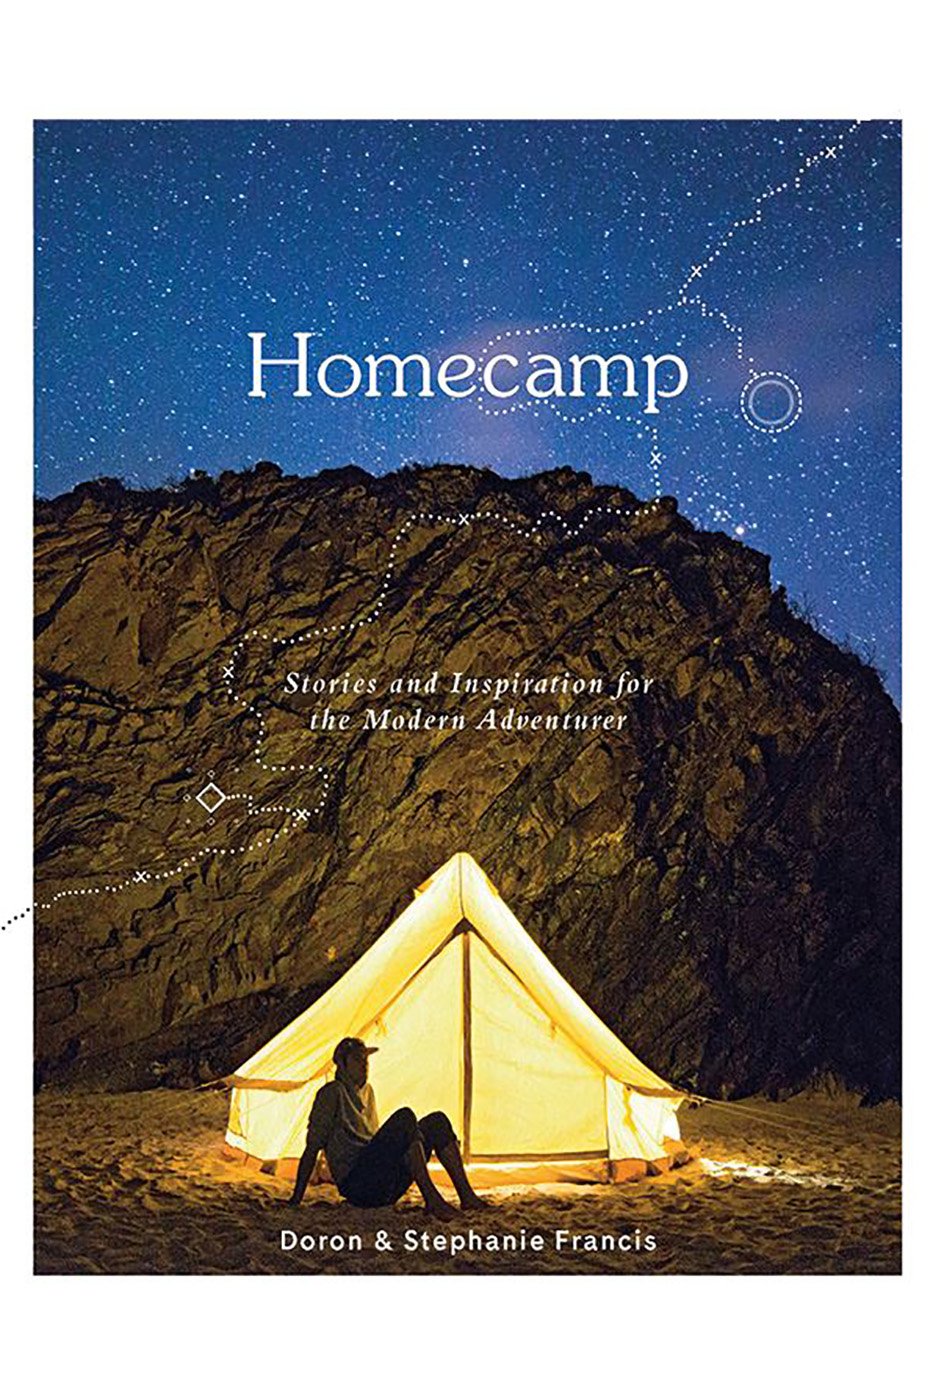 Bookspeed Homecamp Stories And Inspiration For The Modern Adventurer Book By Doron And Stephanie Francis